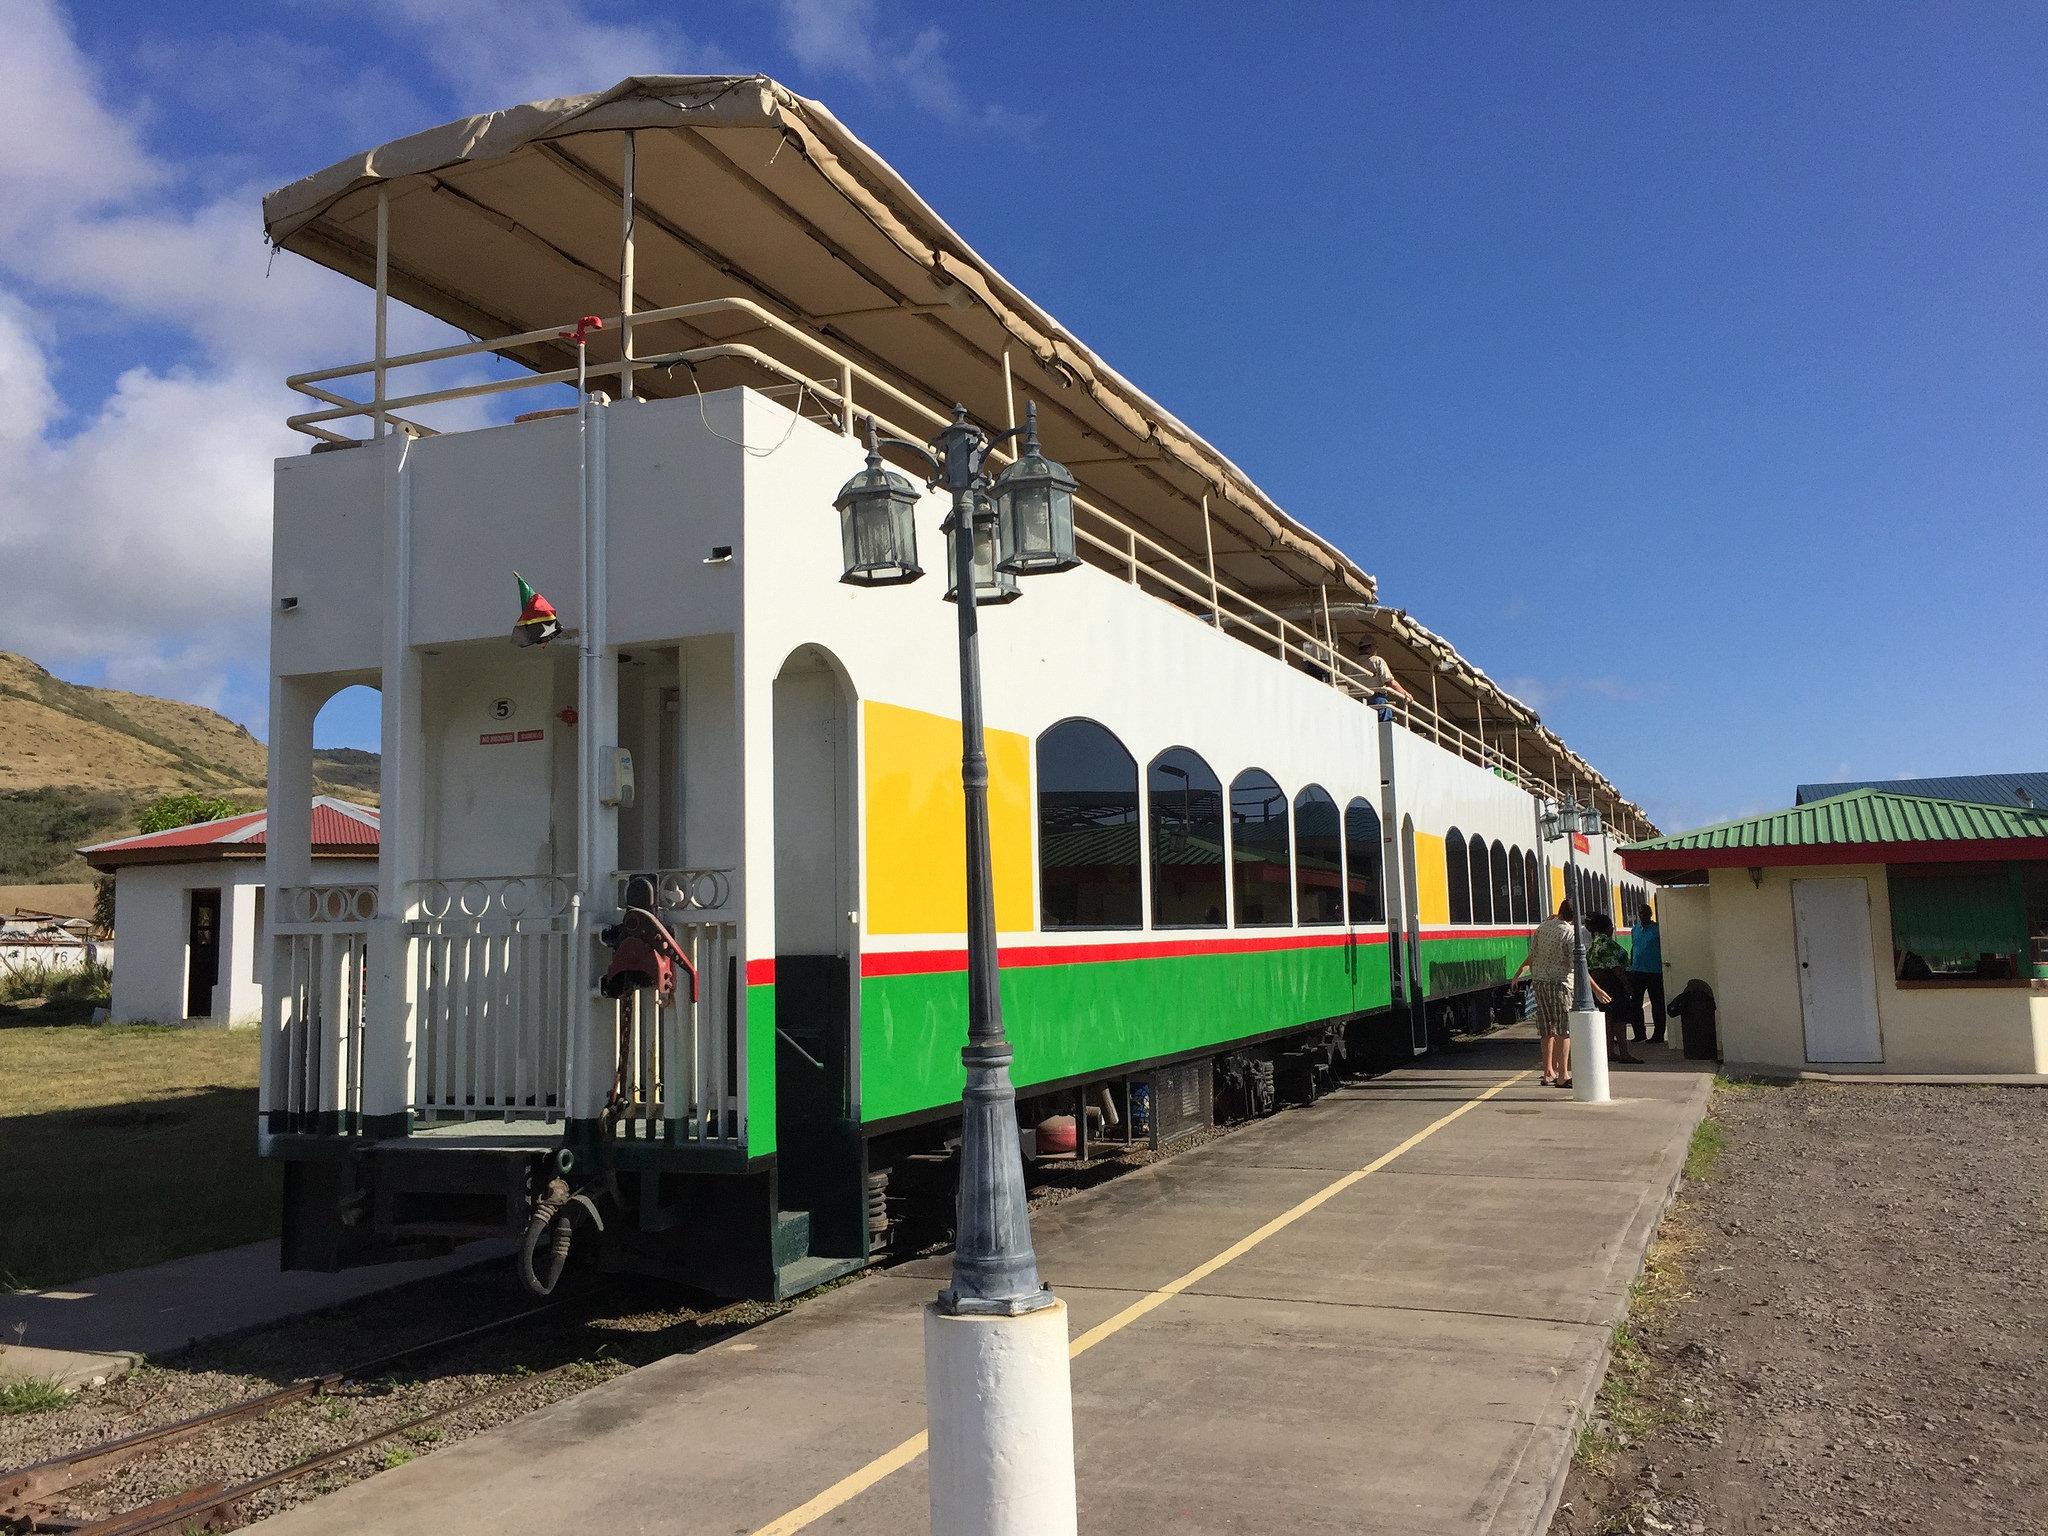 The double-decker train on the St Kitts Scenic Railway